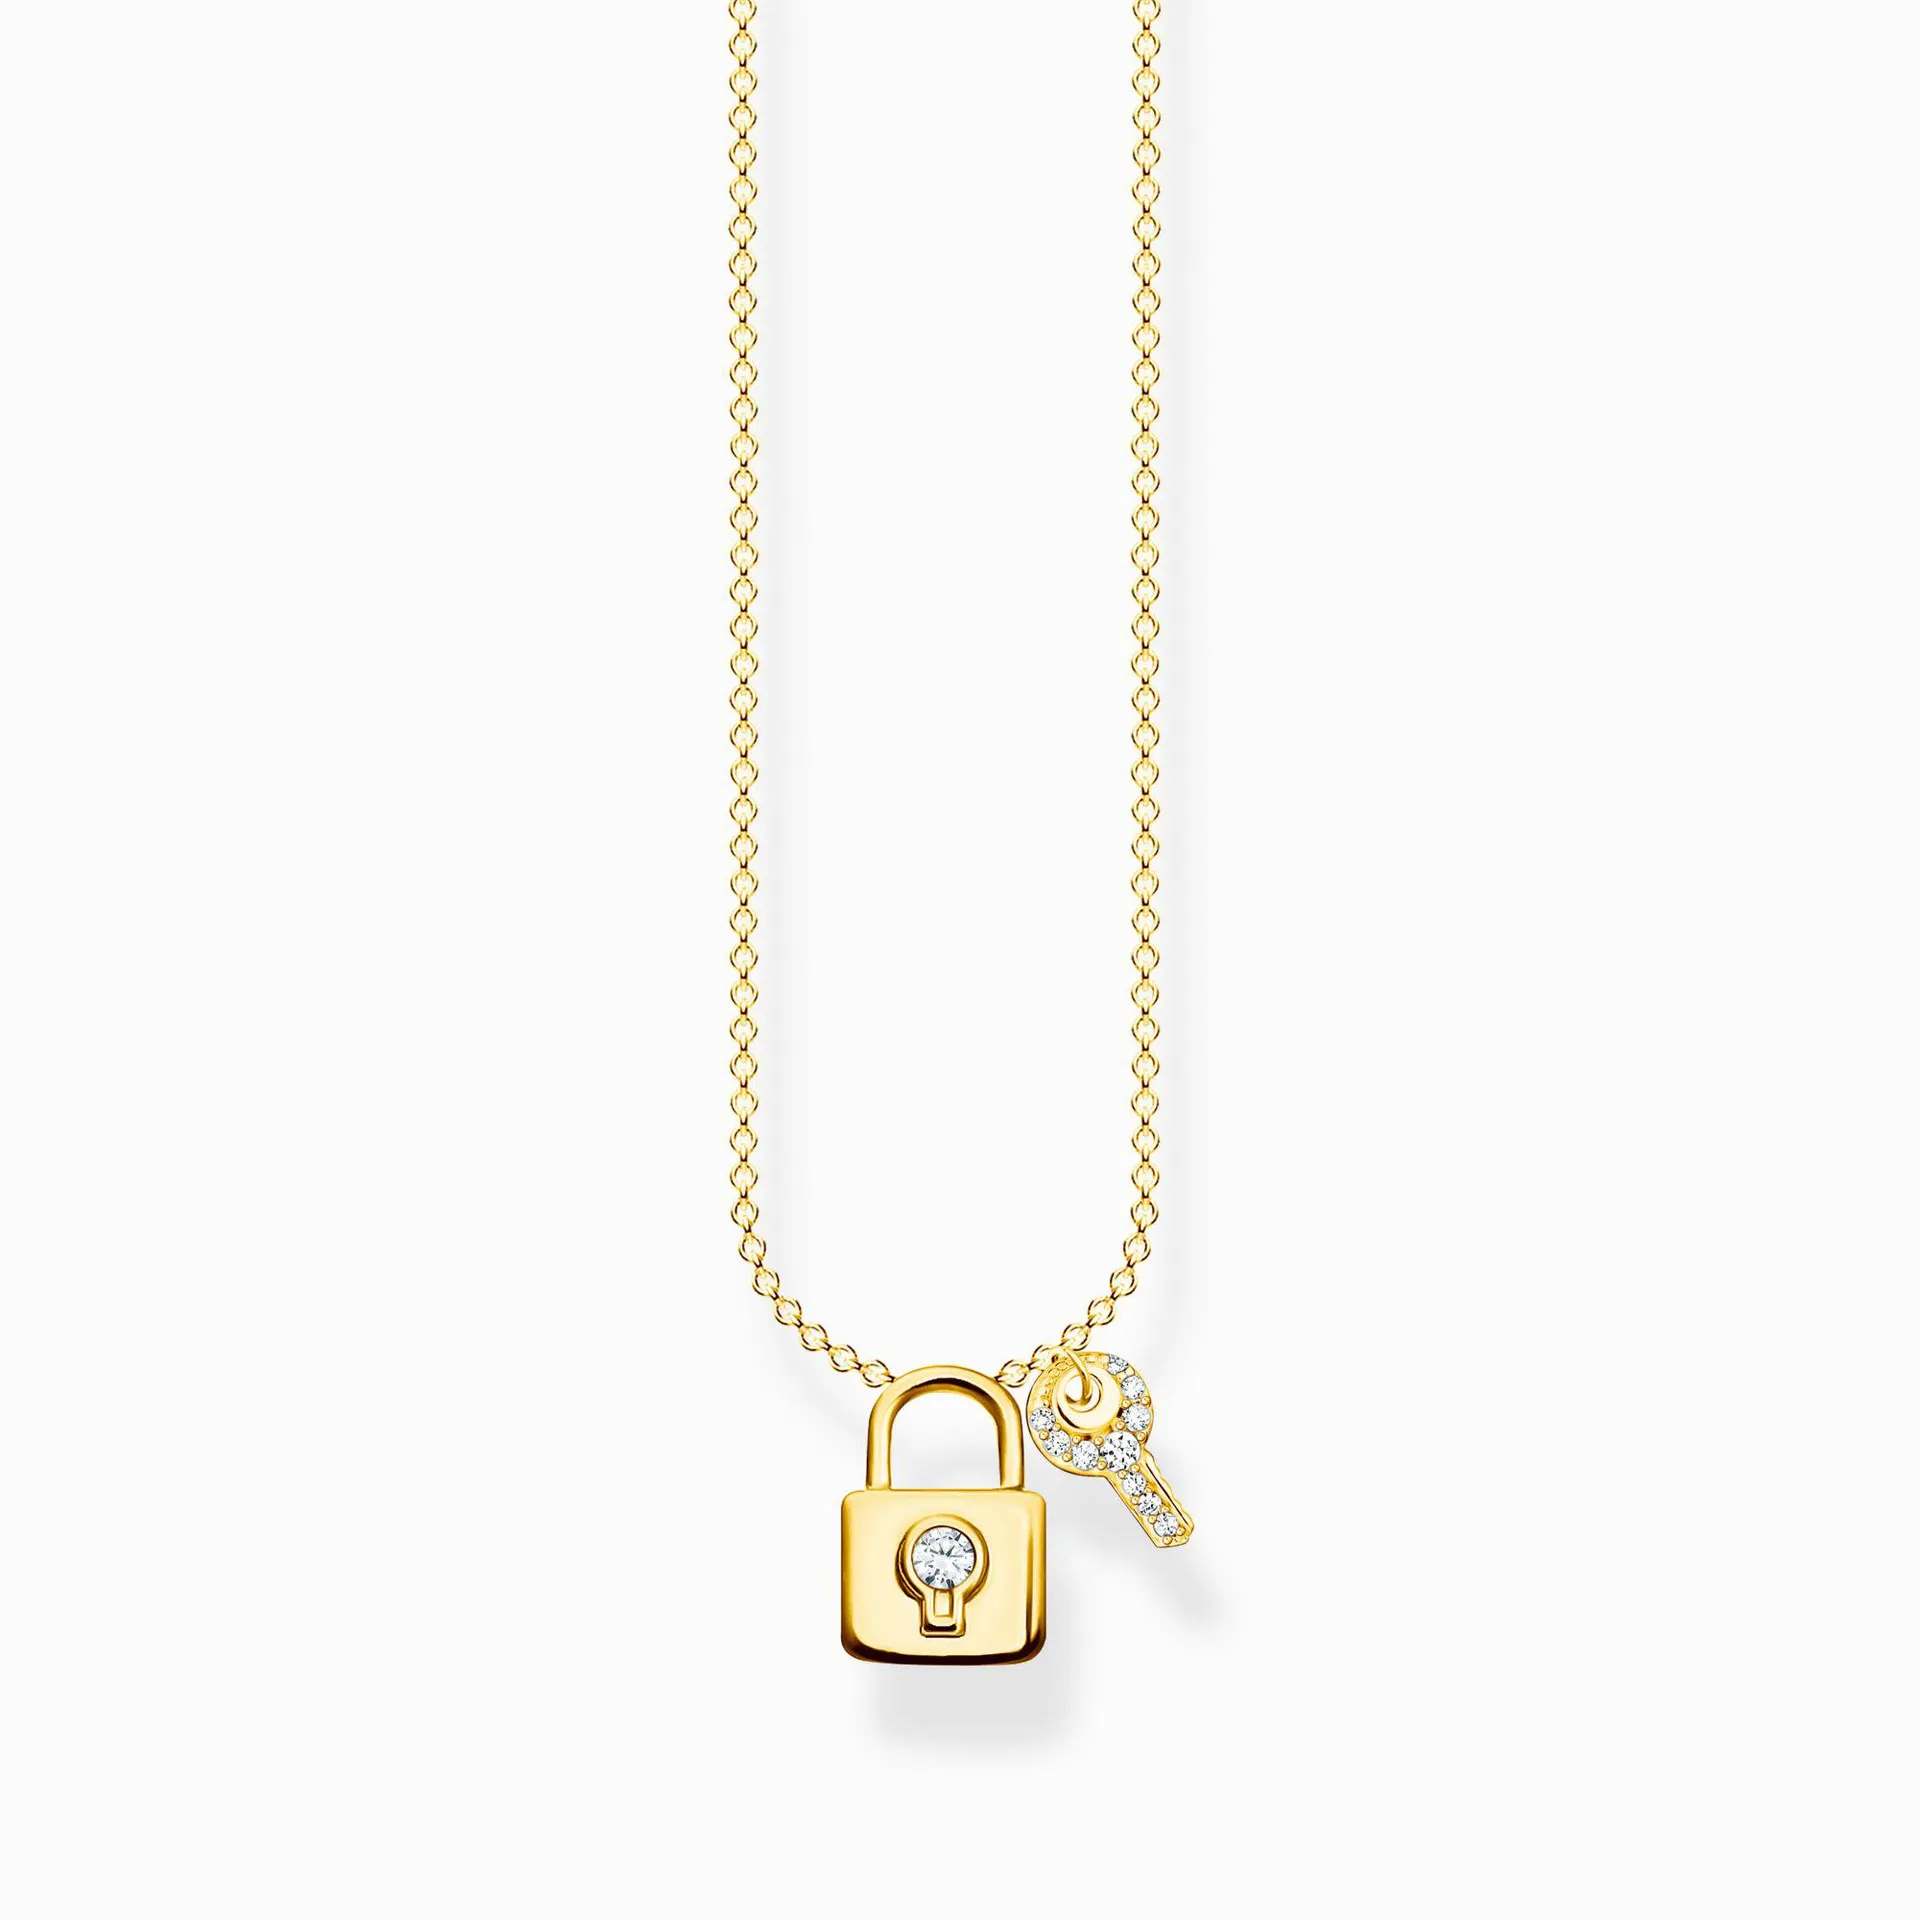 Necklace lock with key gold